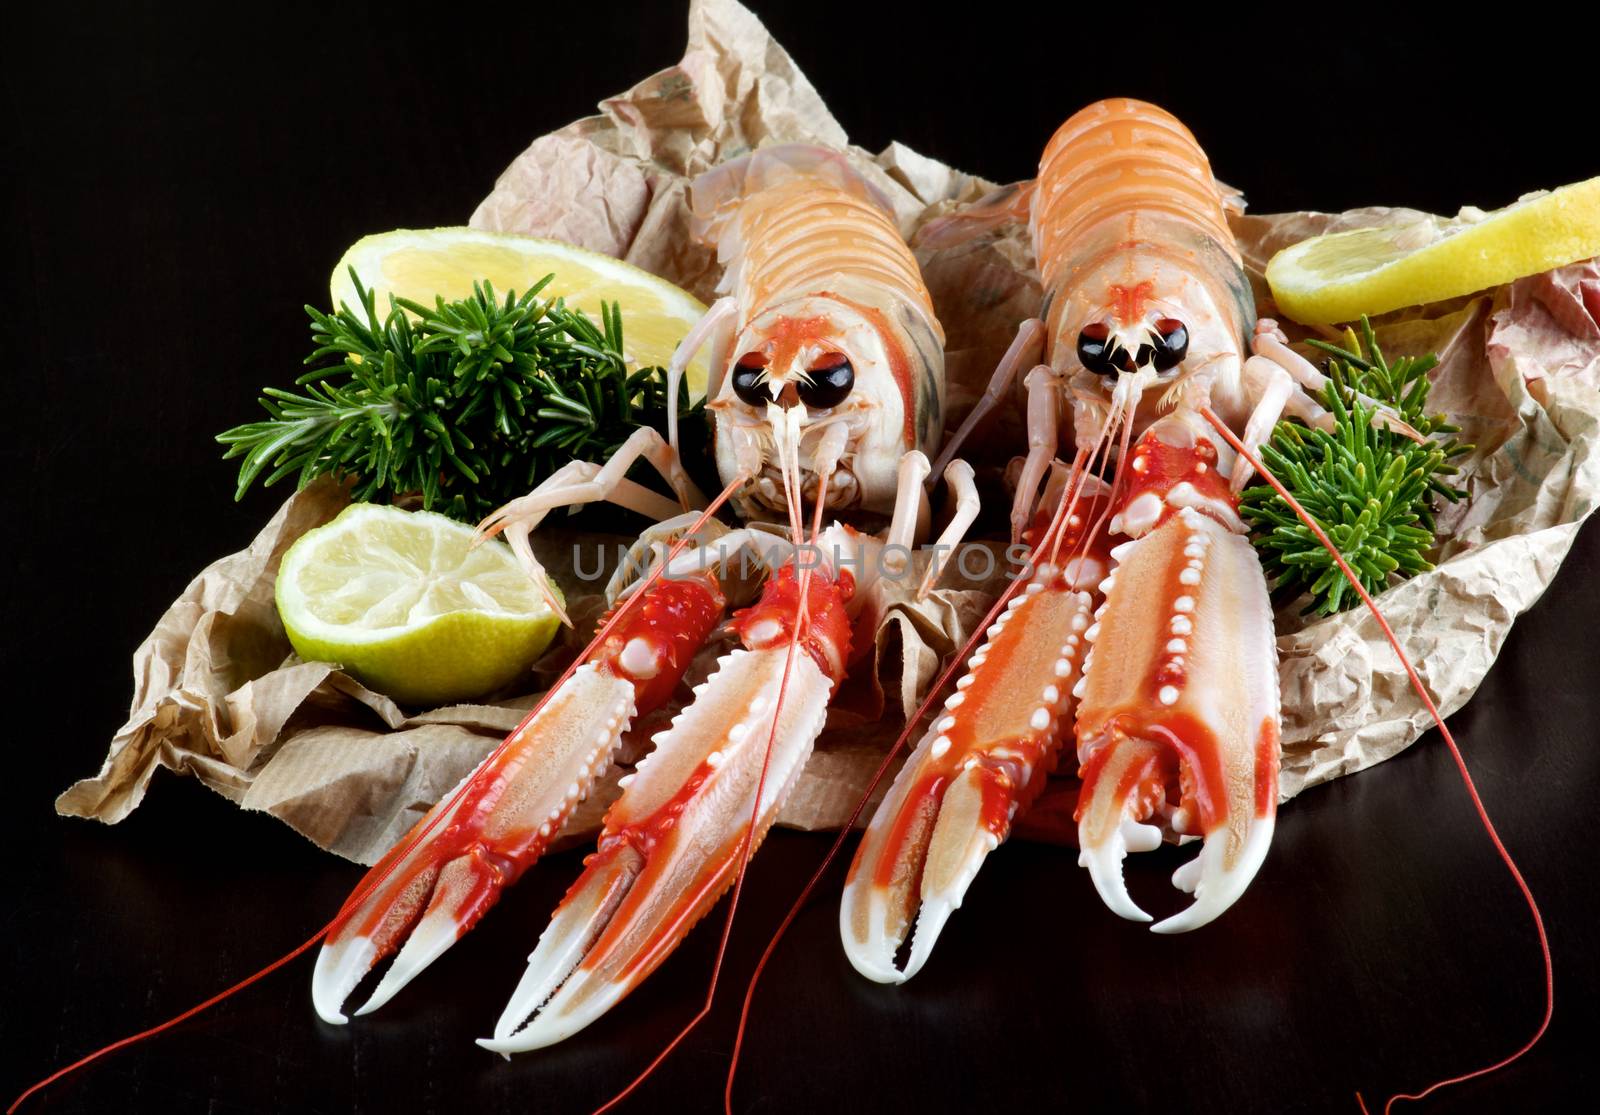 Two Big Raw Langoustines with Lime, Lemons Slices and Rosemary on Parchment Paper closeup on Black Wooden background